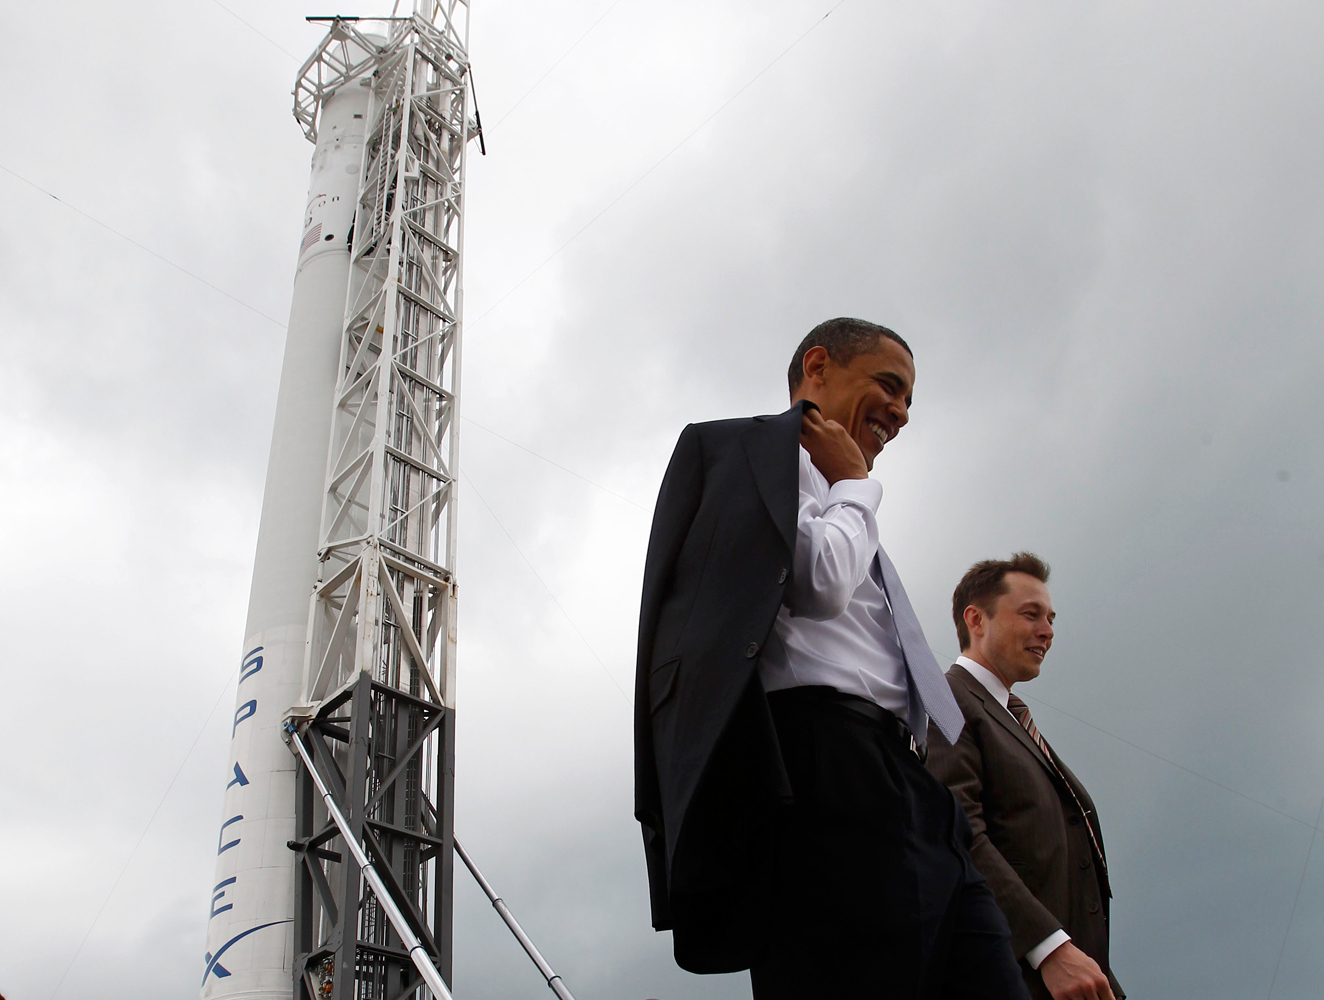 From left: U.S. President Barack Obama and Head of SpaceX Elon Musk tour Cape Canaveral Air Force Station in Cape Canaveral, Fla., on April 15, 2010.